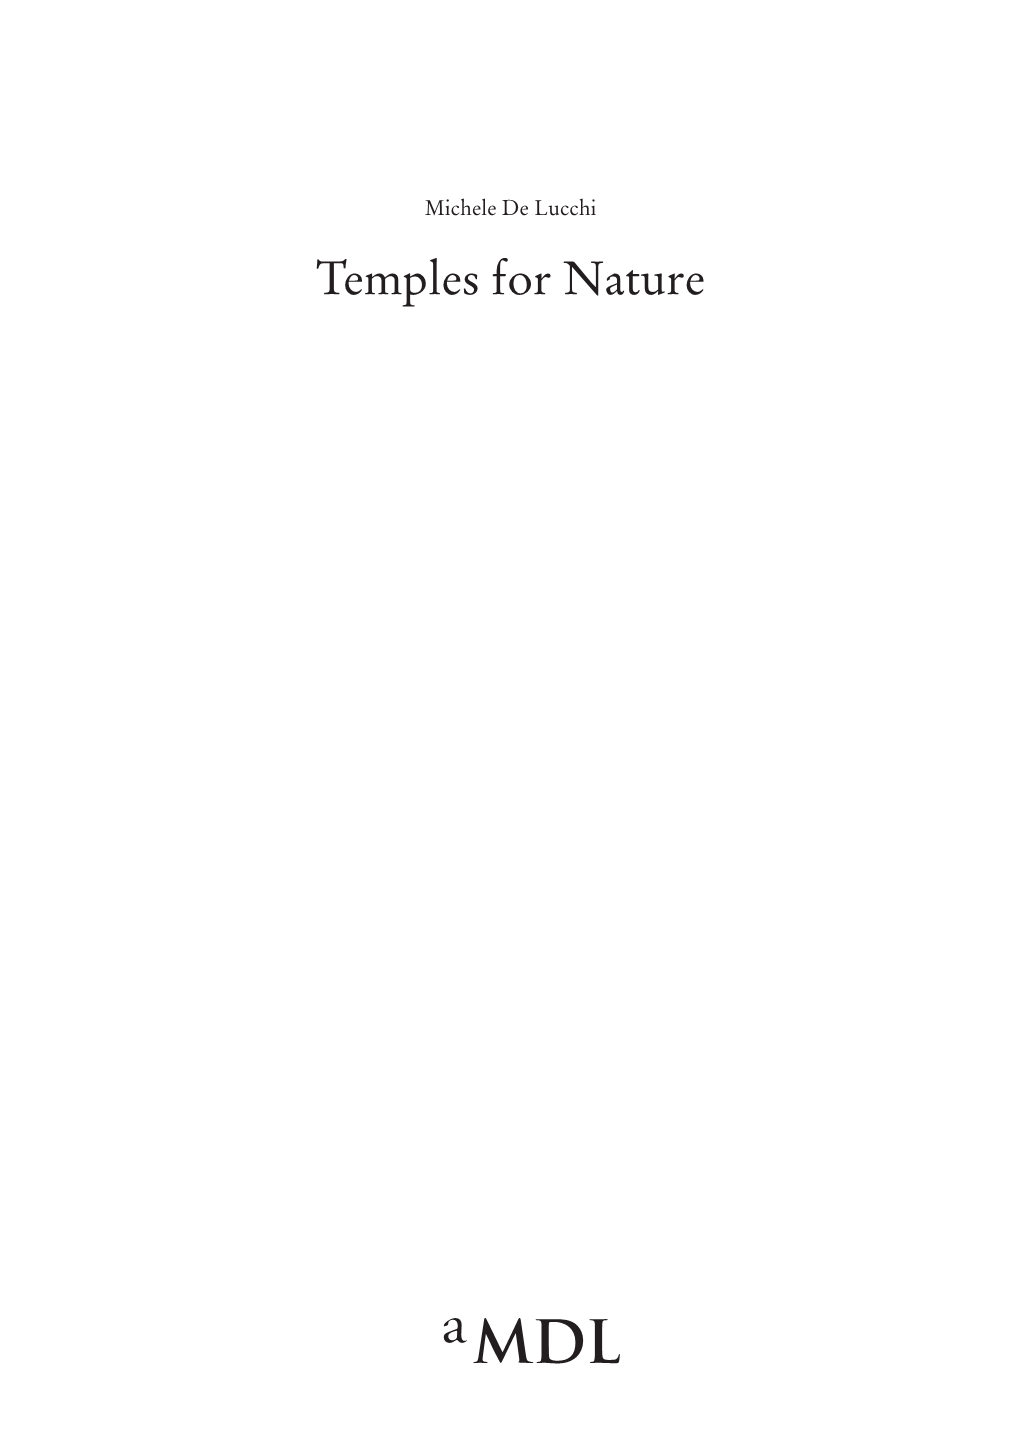 Temples for Nature Sensibility Towards Our Natural Heritage Has Increased So Much That It Is Now Time to Build Temples for Nature